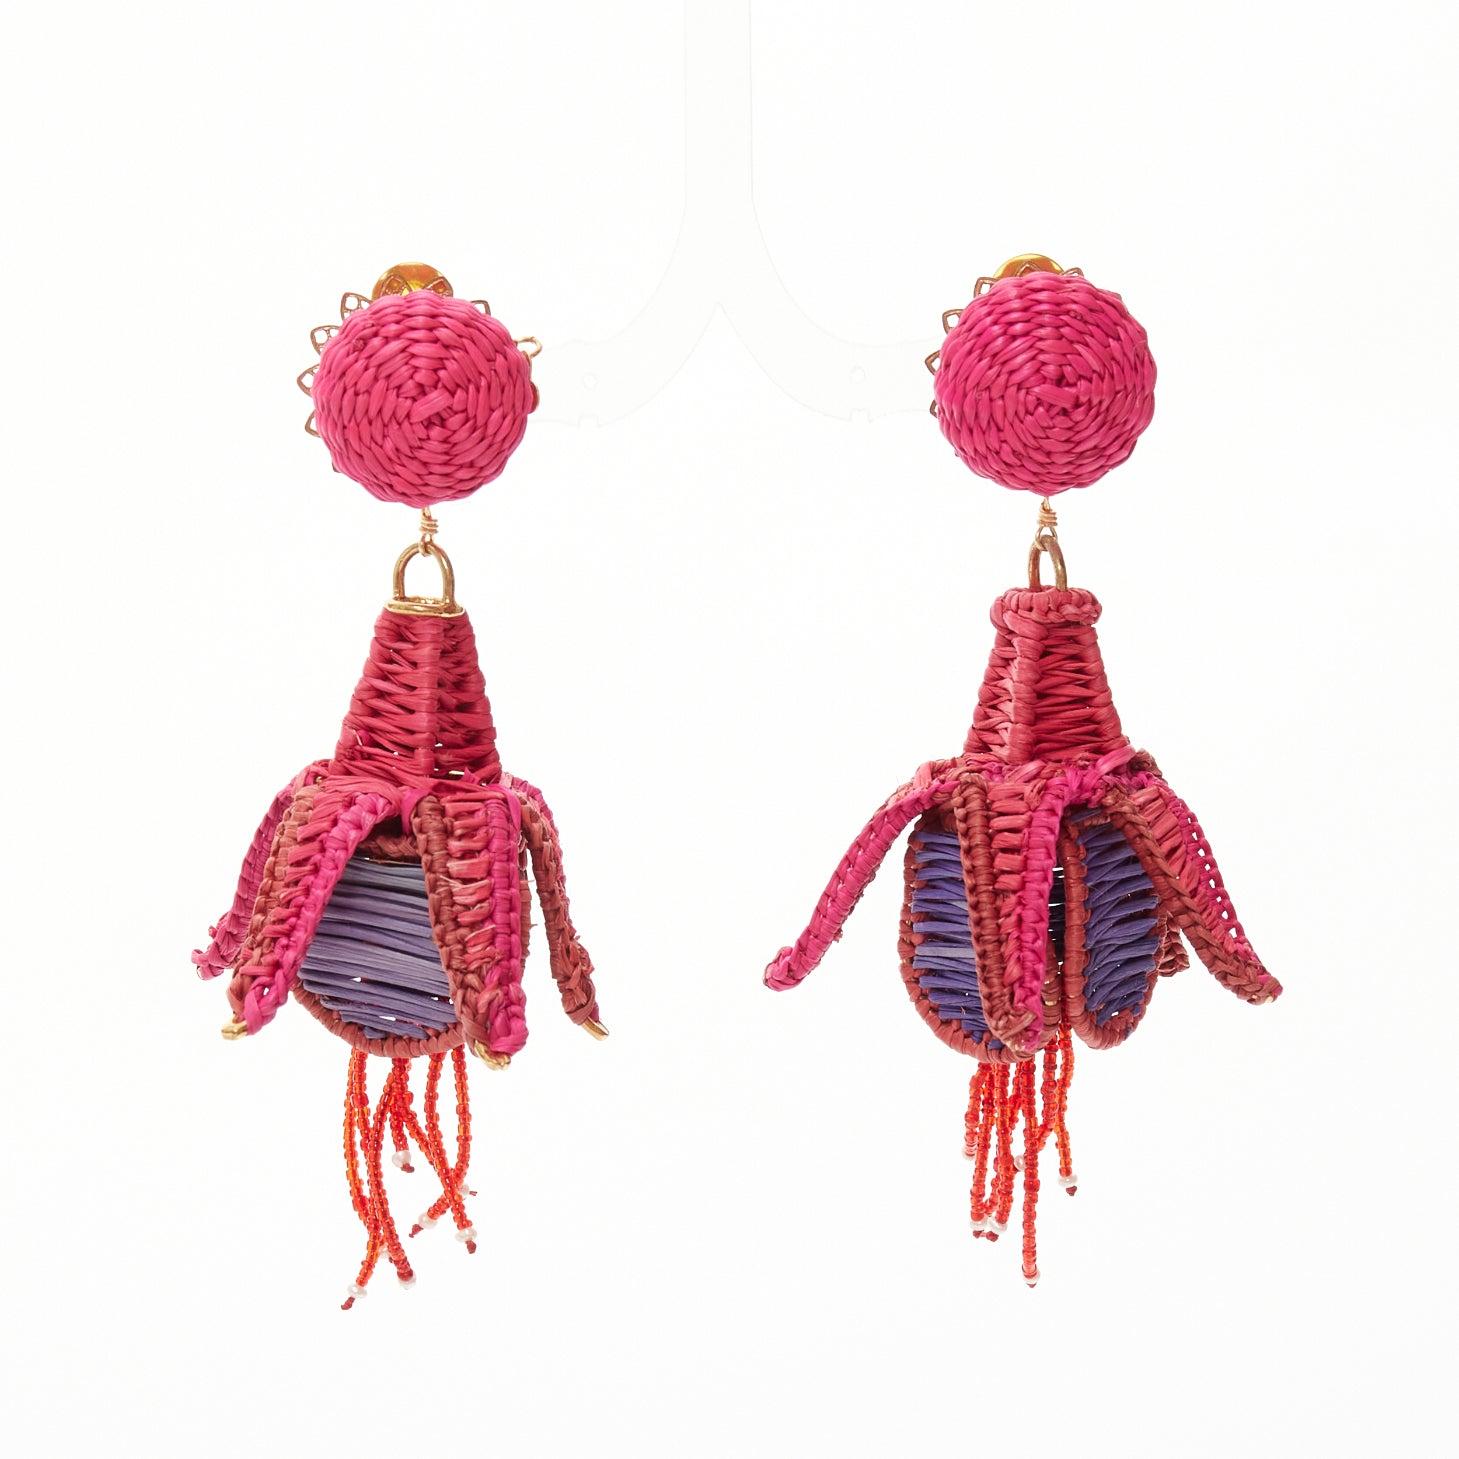 MERCEDES SALAZAR hot pink purple raffia weave bell flower clip on earrings
Reference: AAWC/A01245
Brand: Mercedes Salazar
Material: Raffia
Color: Pink, Purple
Pattern: Floral
Closure: Clip On
Lining: Gold Metal

CONDITION:
Condition: Excellent, this